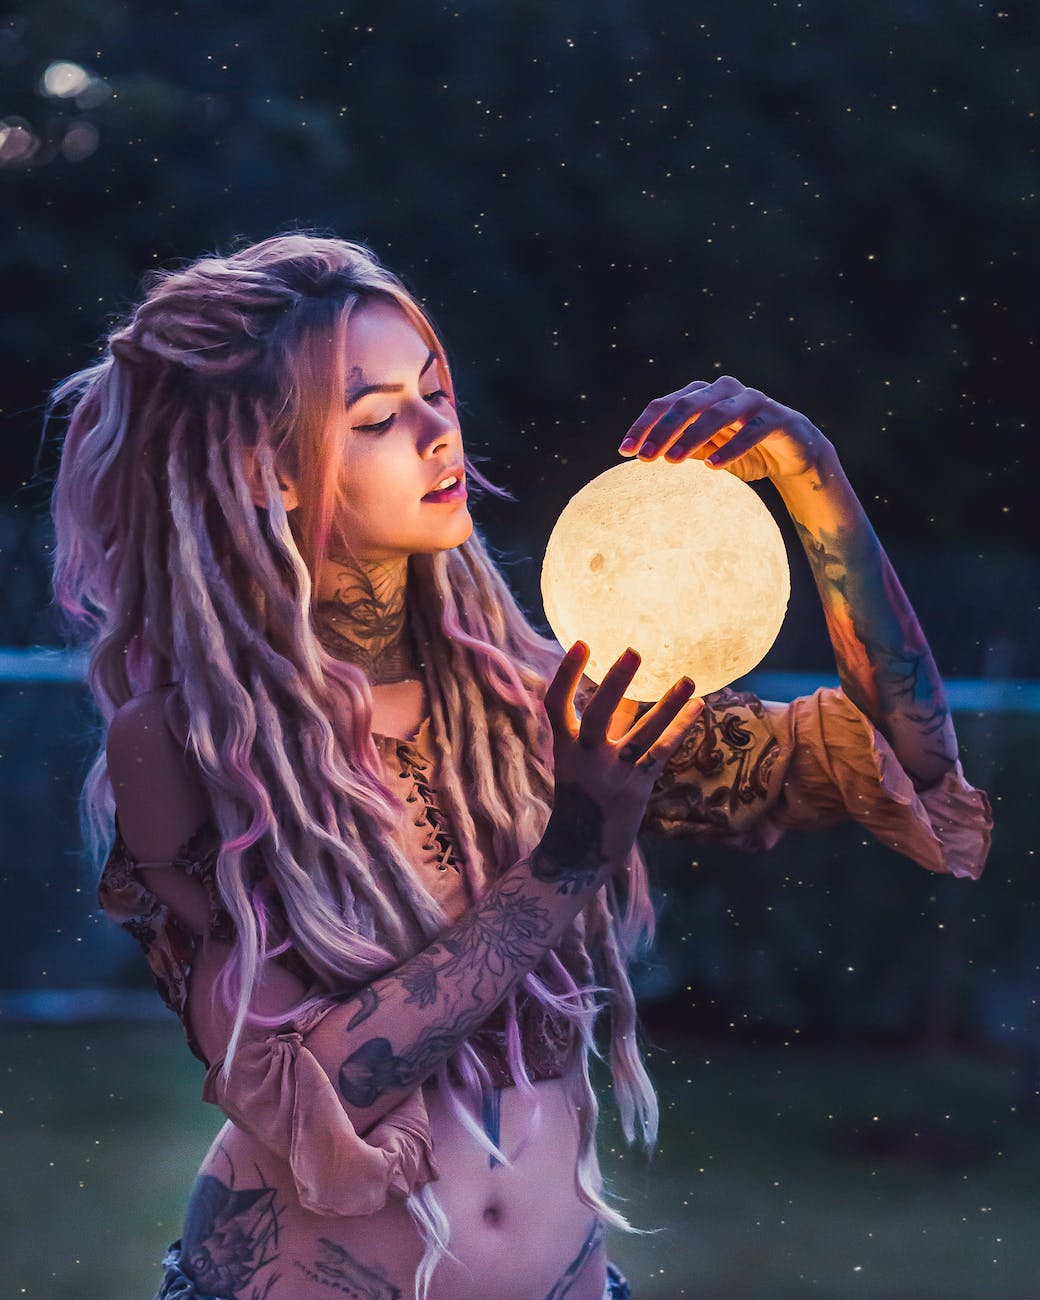 woman with tattoo holding glass globe